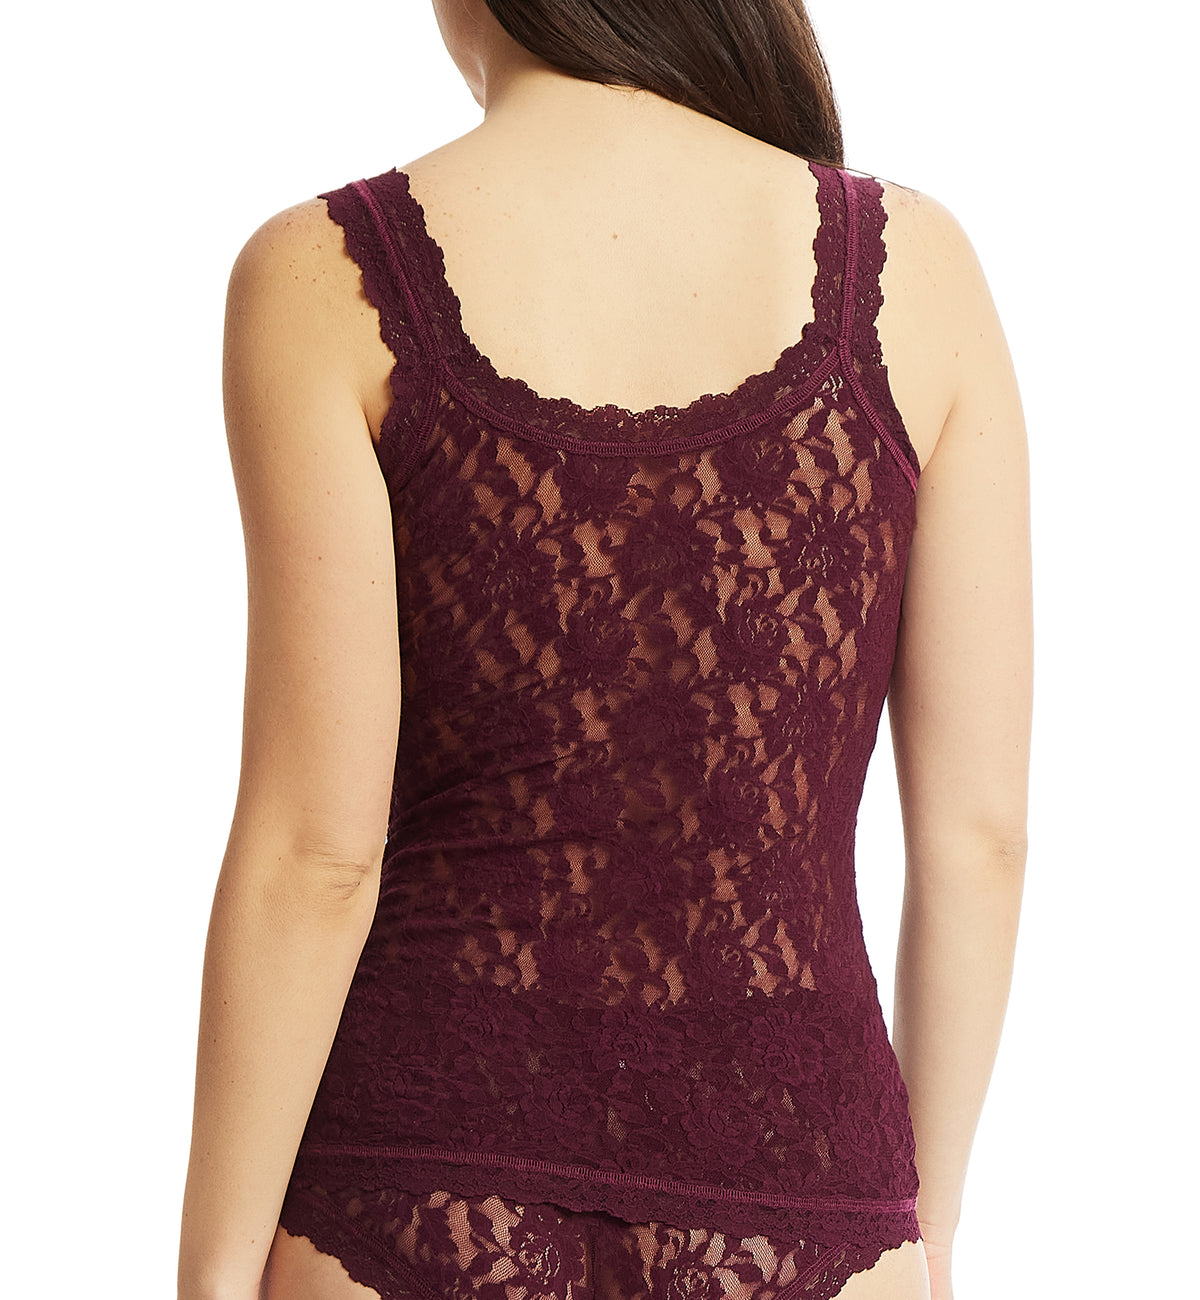 Hanky Panky Signature Lace Unlined Camisole (1390LP),XS,Dried Cherry - Dried Cherry,XS